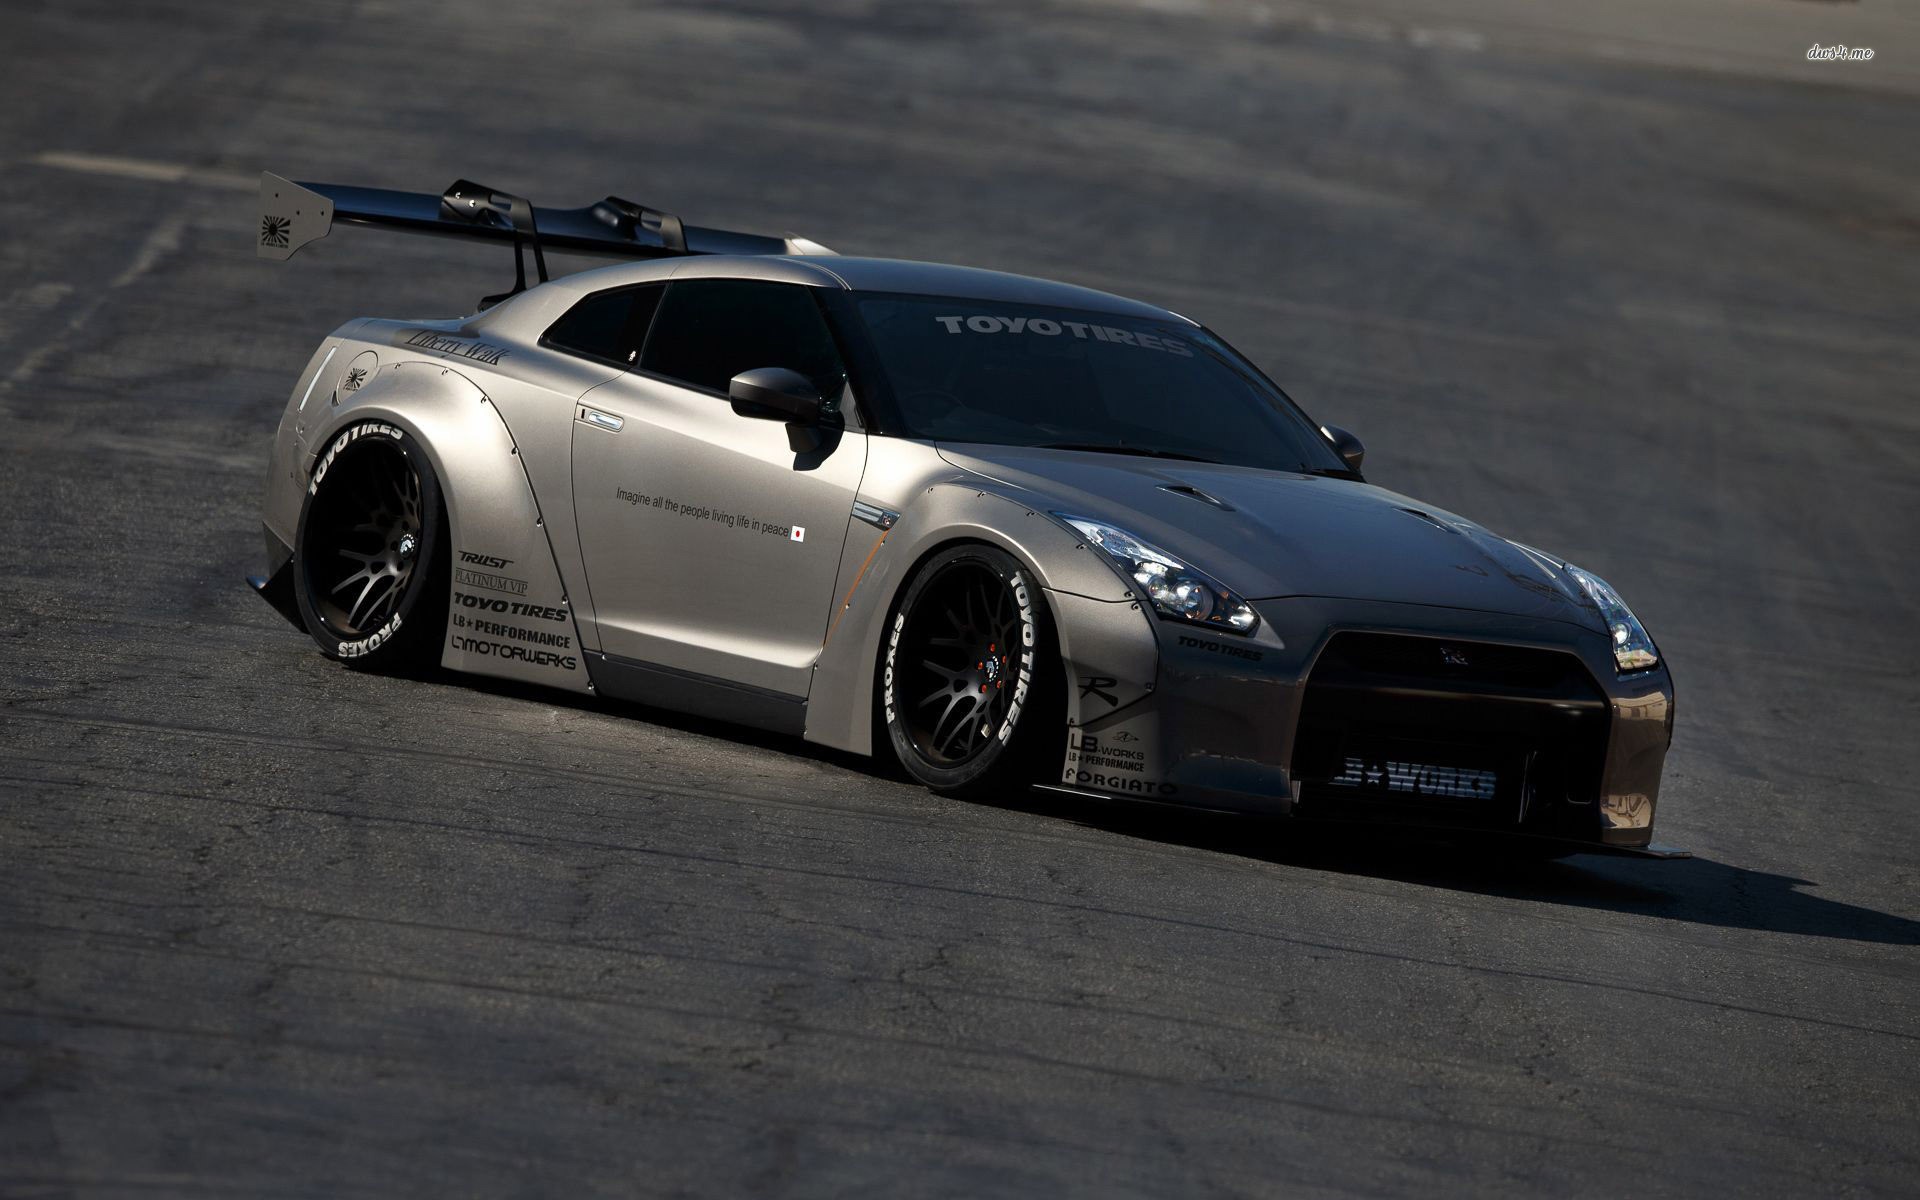 General 1920x1200 Liberty Walk Nissan car Nissan GT-R frontal view silver cars vehicle bodykit Japanese cars